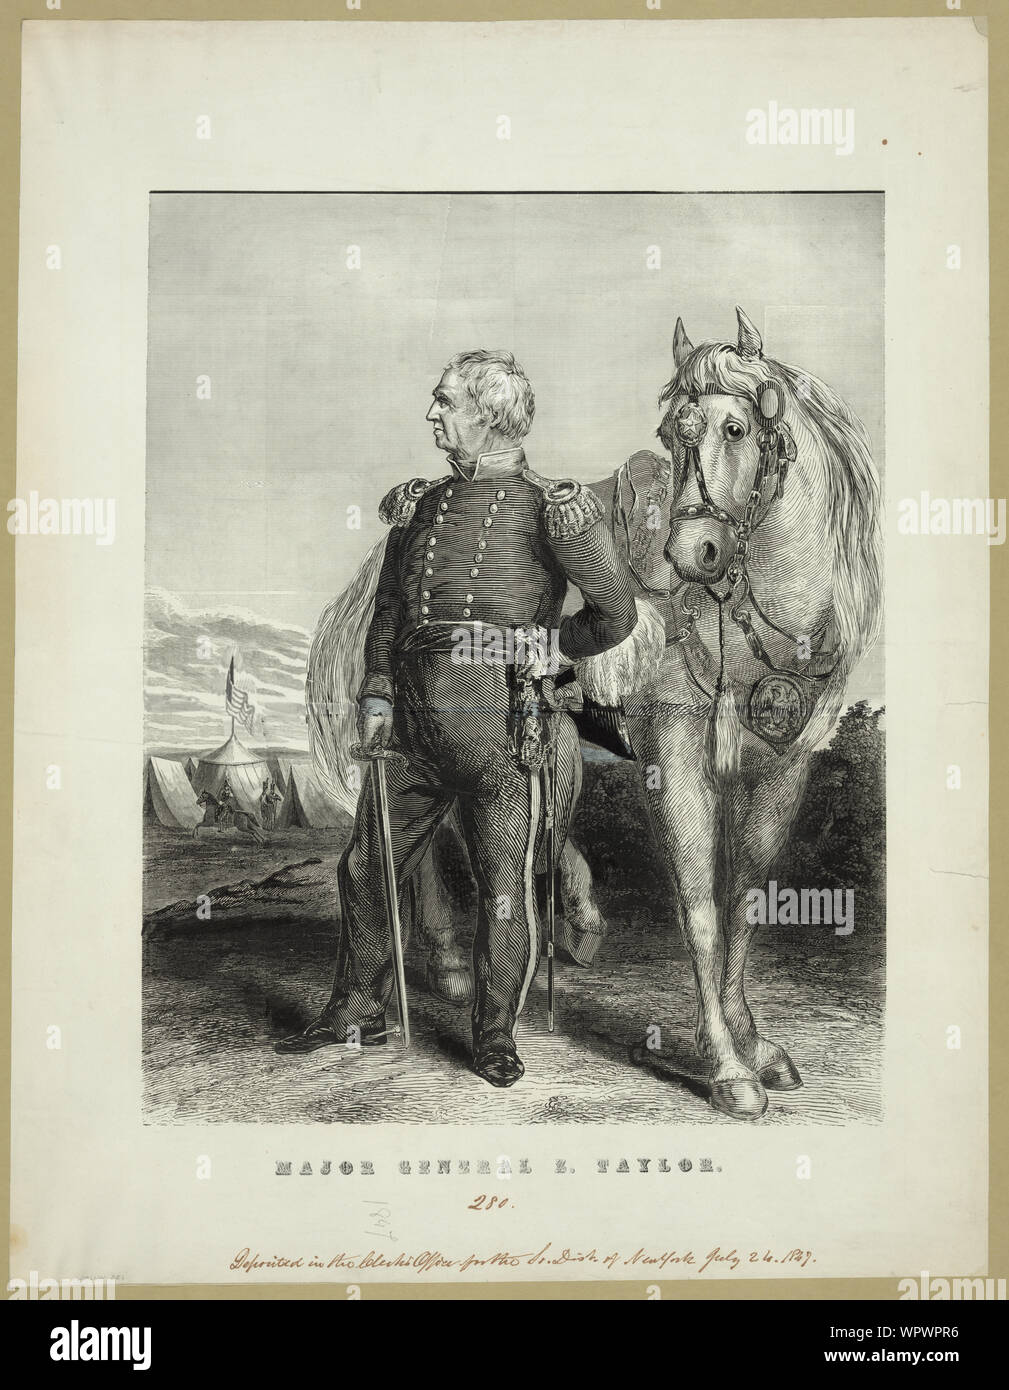 Major General Z. Taylor Abstract: A full-length standing portrait of Mexican War hero Zachary Taylor. Although issued in 1847, this poster-sized woodcut was probably designed with the 1848 U.S. presidential campaign in mind. Stock Photo